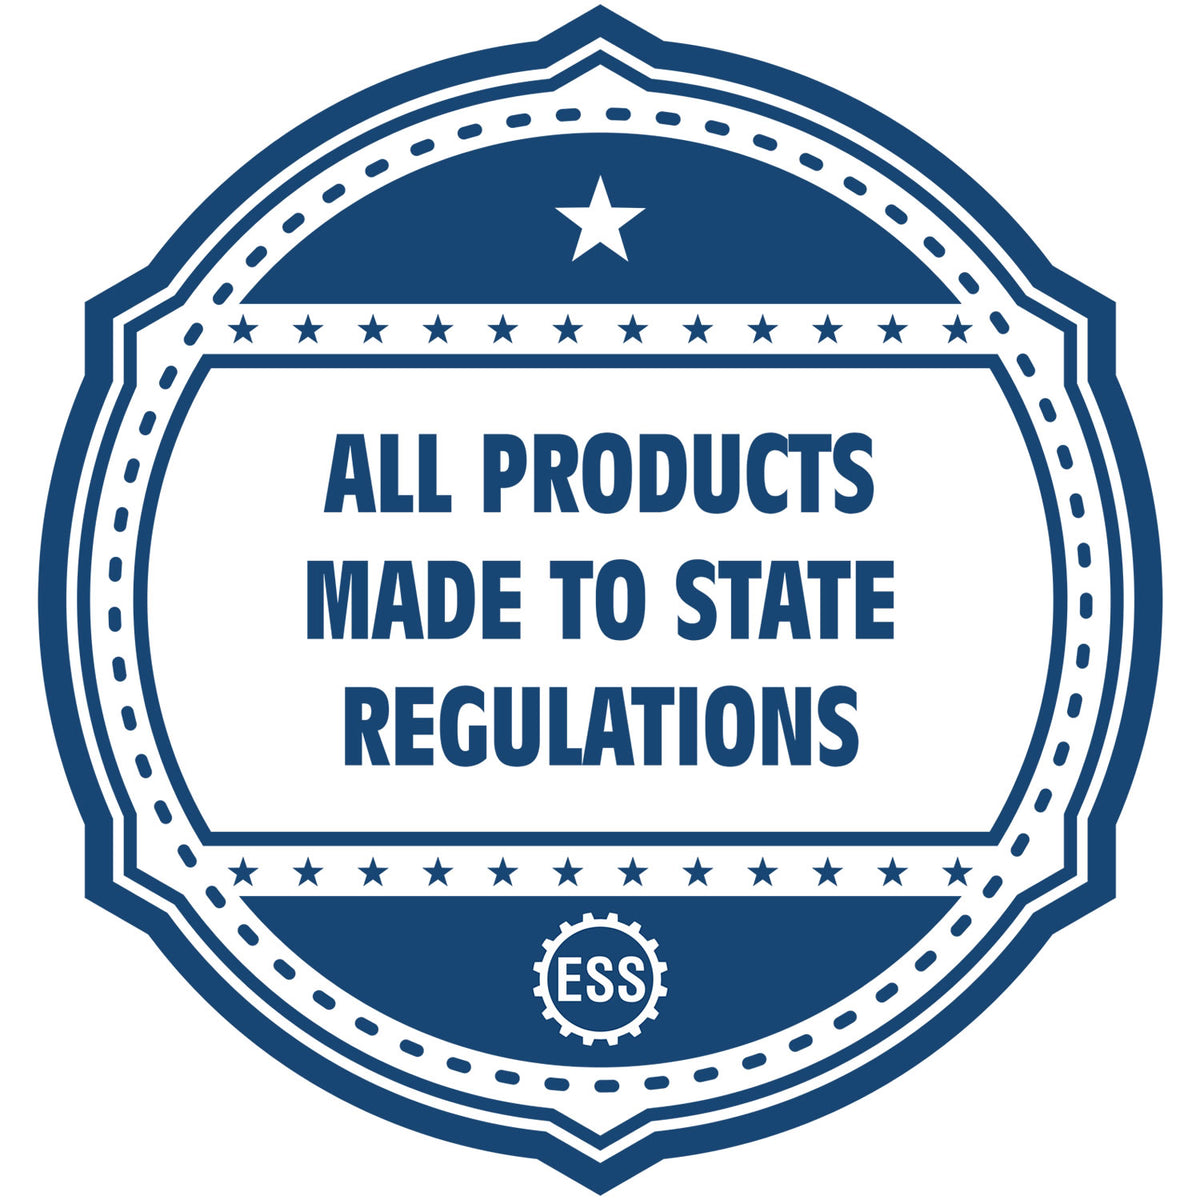 An icon or badge element for the Self-Inking New Mexico PE Stamp showing that this product is made in compliance with state regulations.